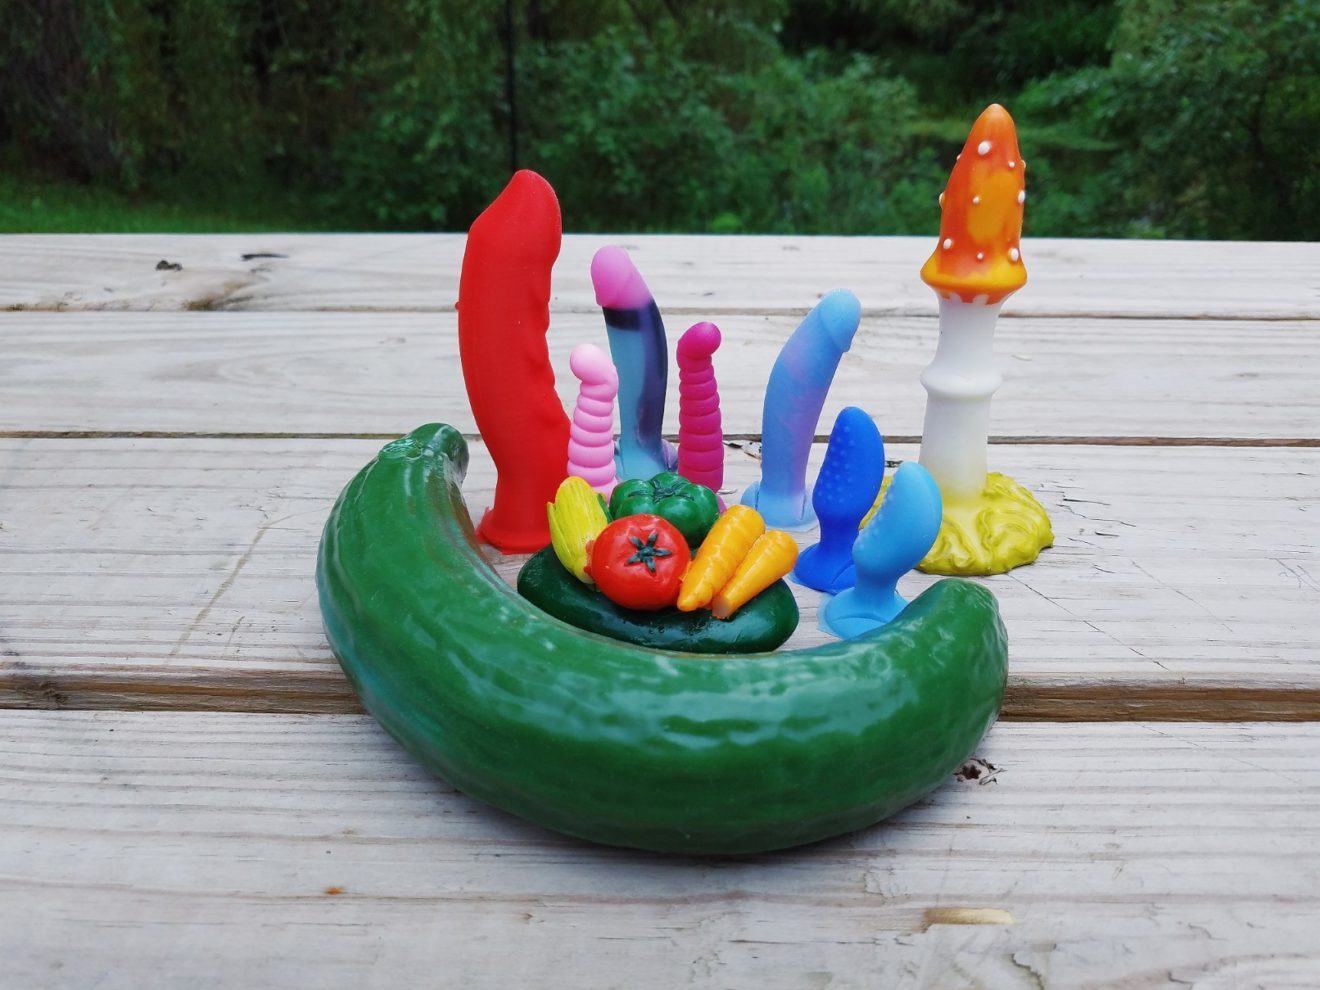 [Image: Self Delve Curved Cucumber and Fly Agaric next to colorful and tiny Funkit and Fun Factory dils]